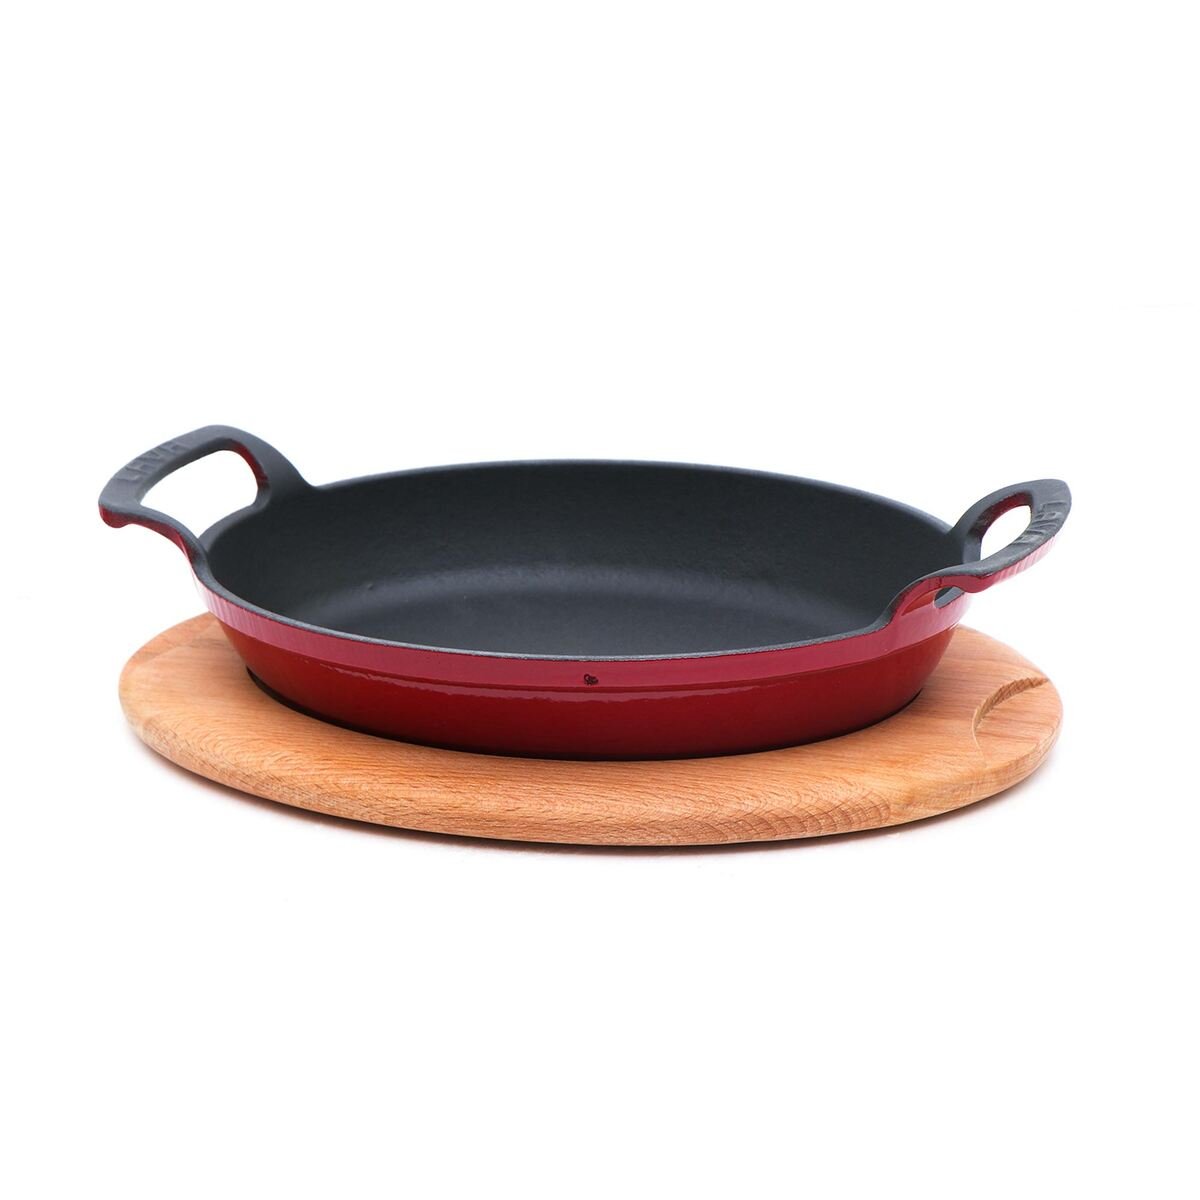 Lava Wooden Base Cast Iron Sizzler Pan, Oval, 23 x 17 cm, AH221BE